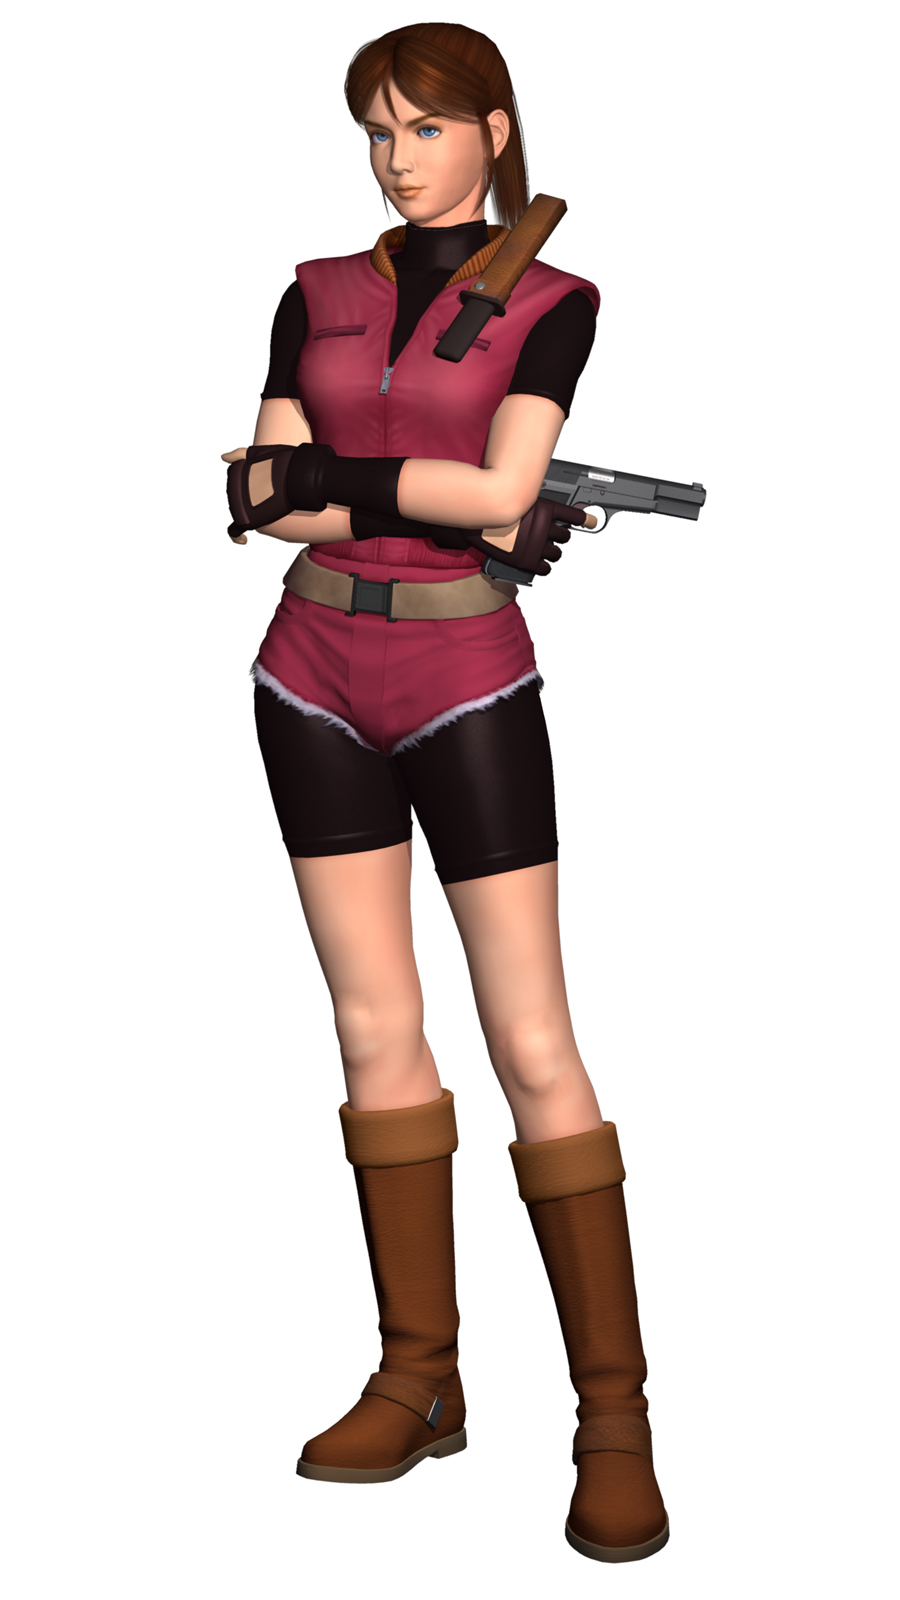 Image Resident Evil 2 Claire Redfield Render Resident Evil Wiki Fandom Powered By Wikia 3460